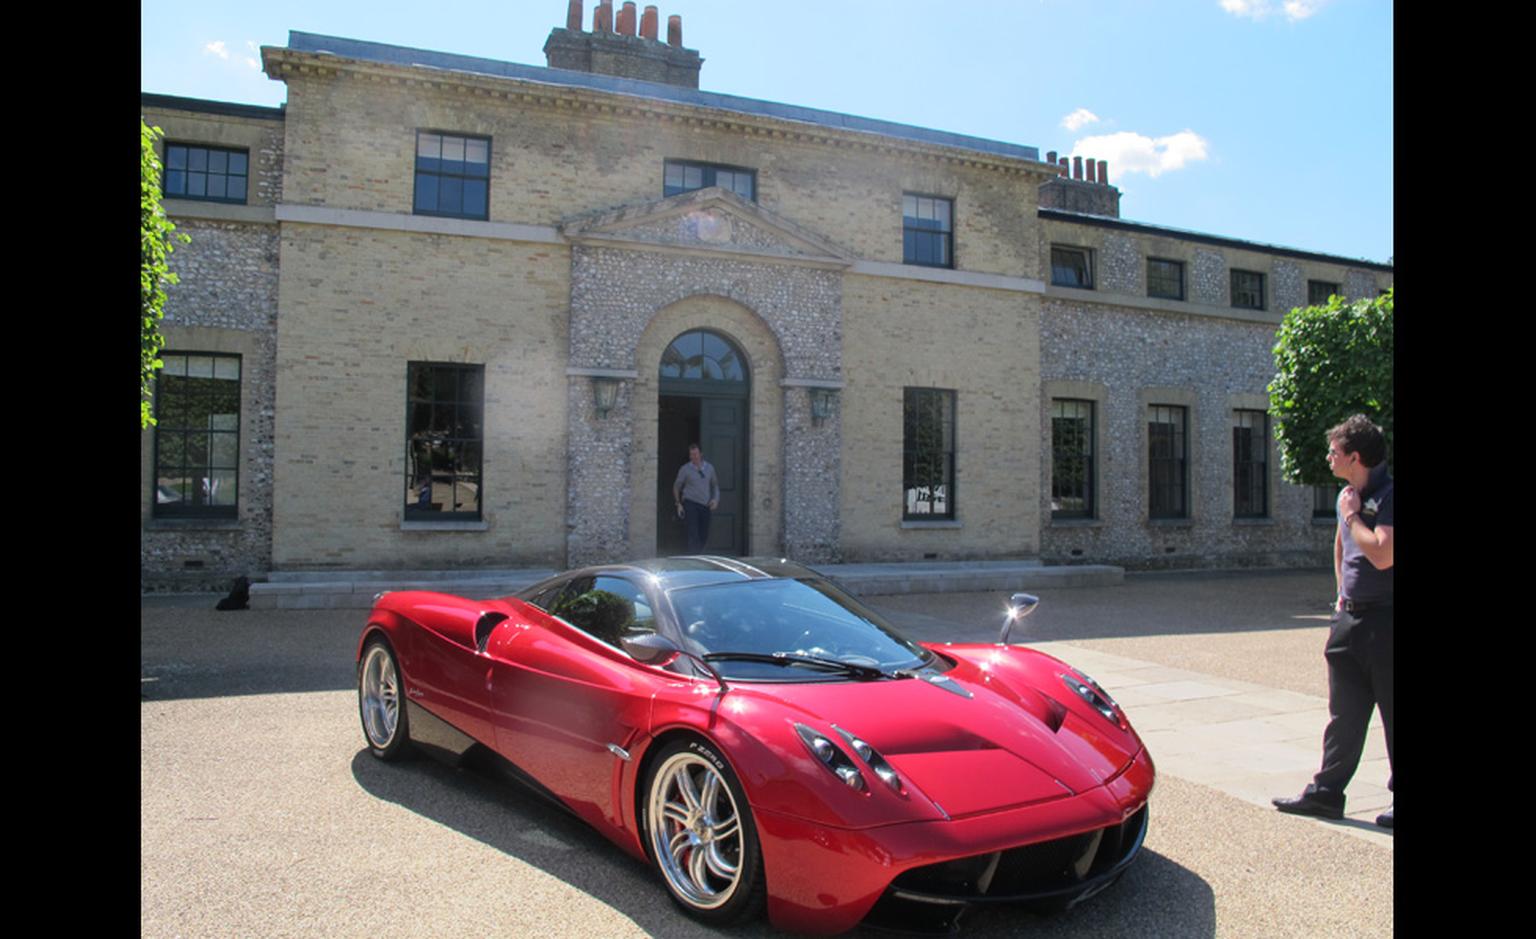 Here you are, at last, a picture of a complete car. This red roarer was outside the entrance to The Kennels golf club and I believe it is a Pagani.